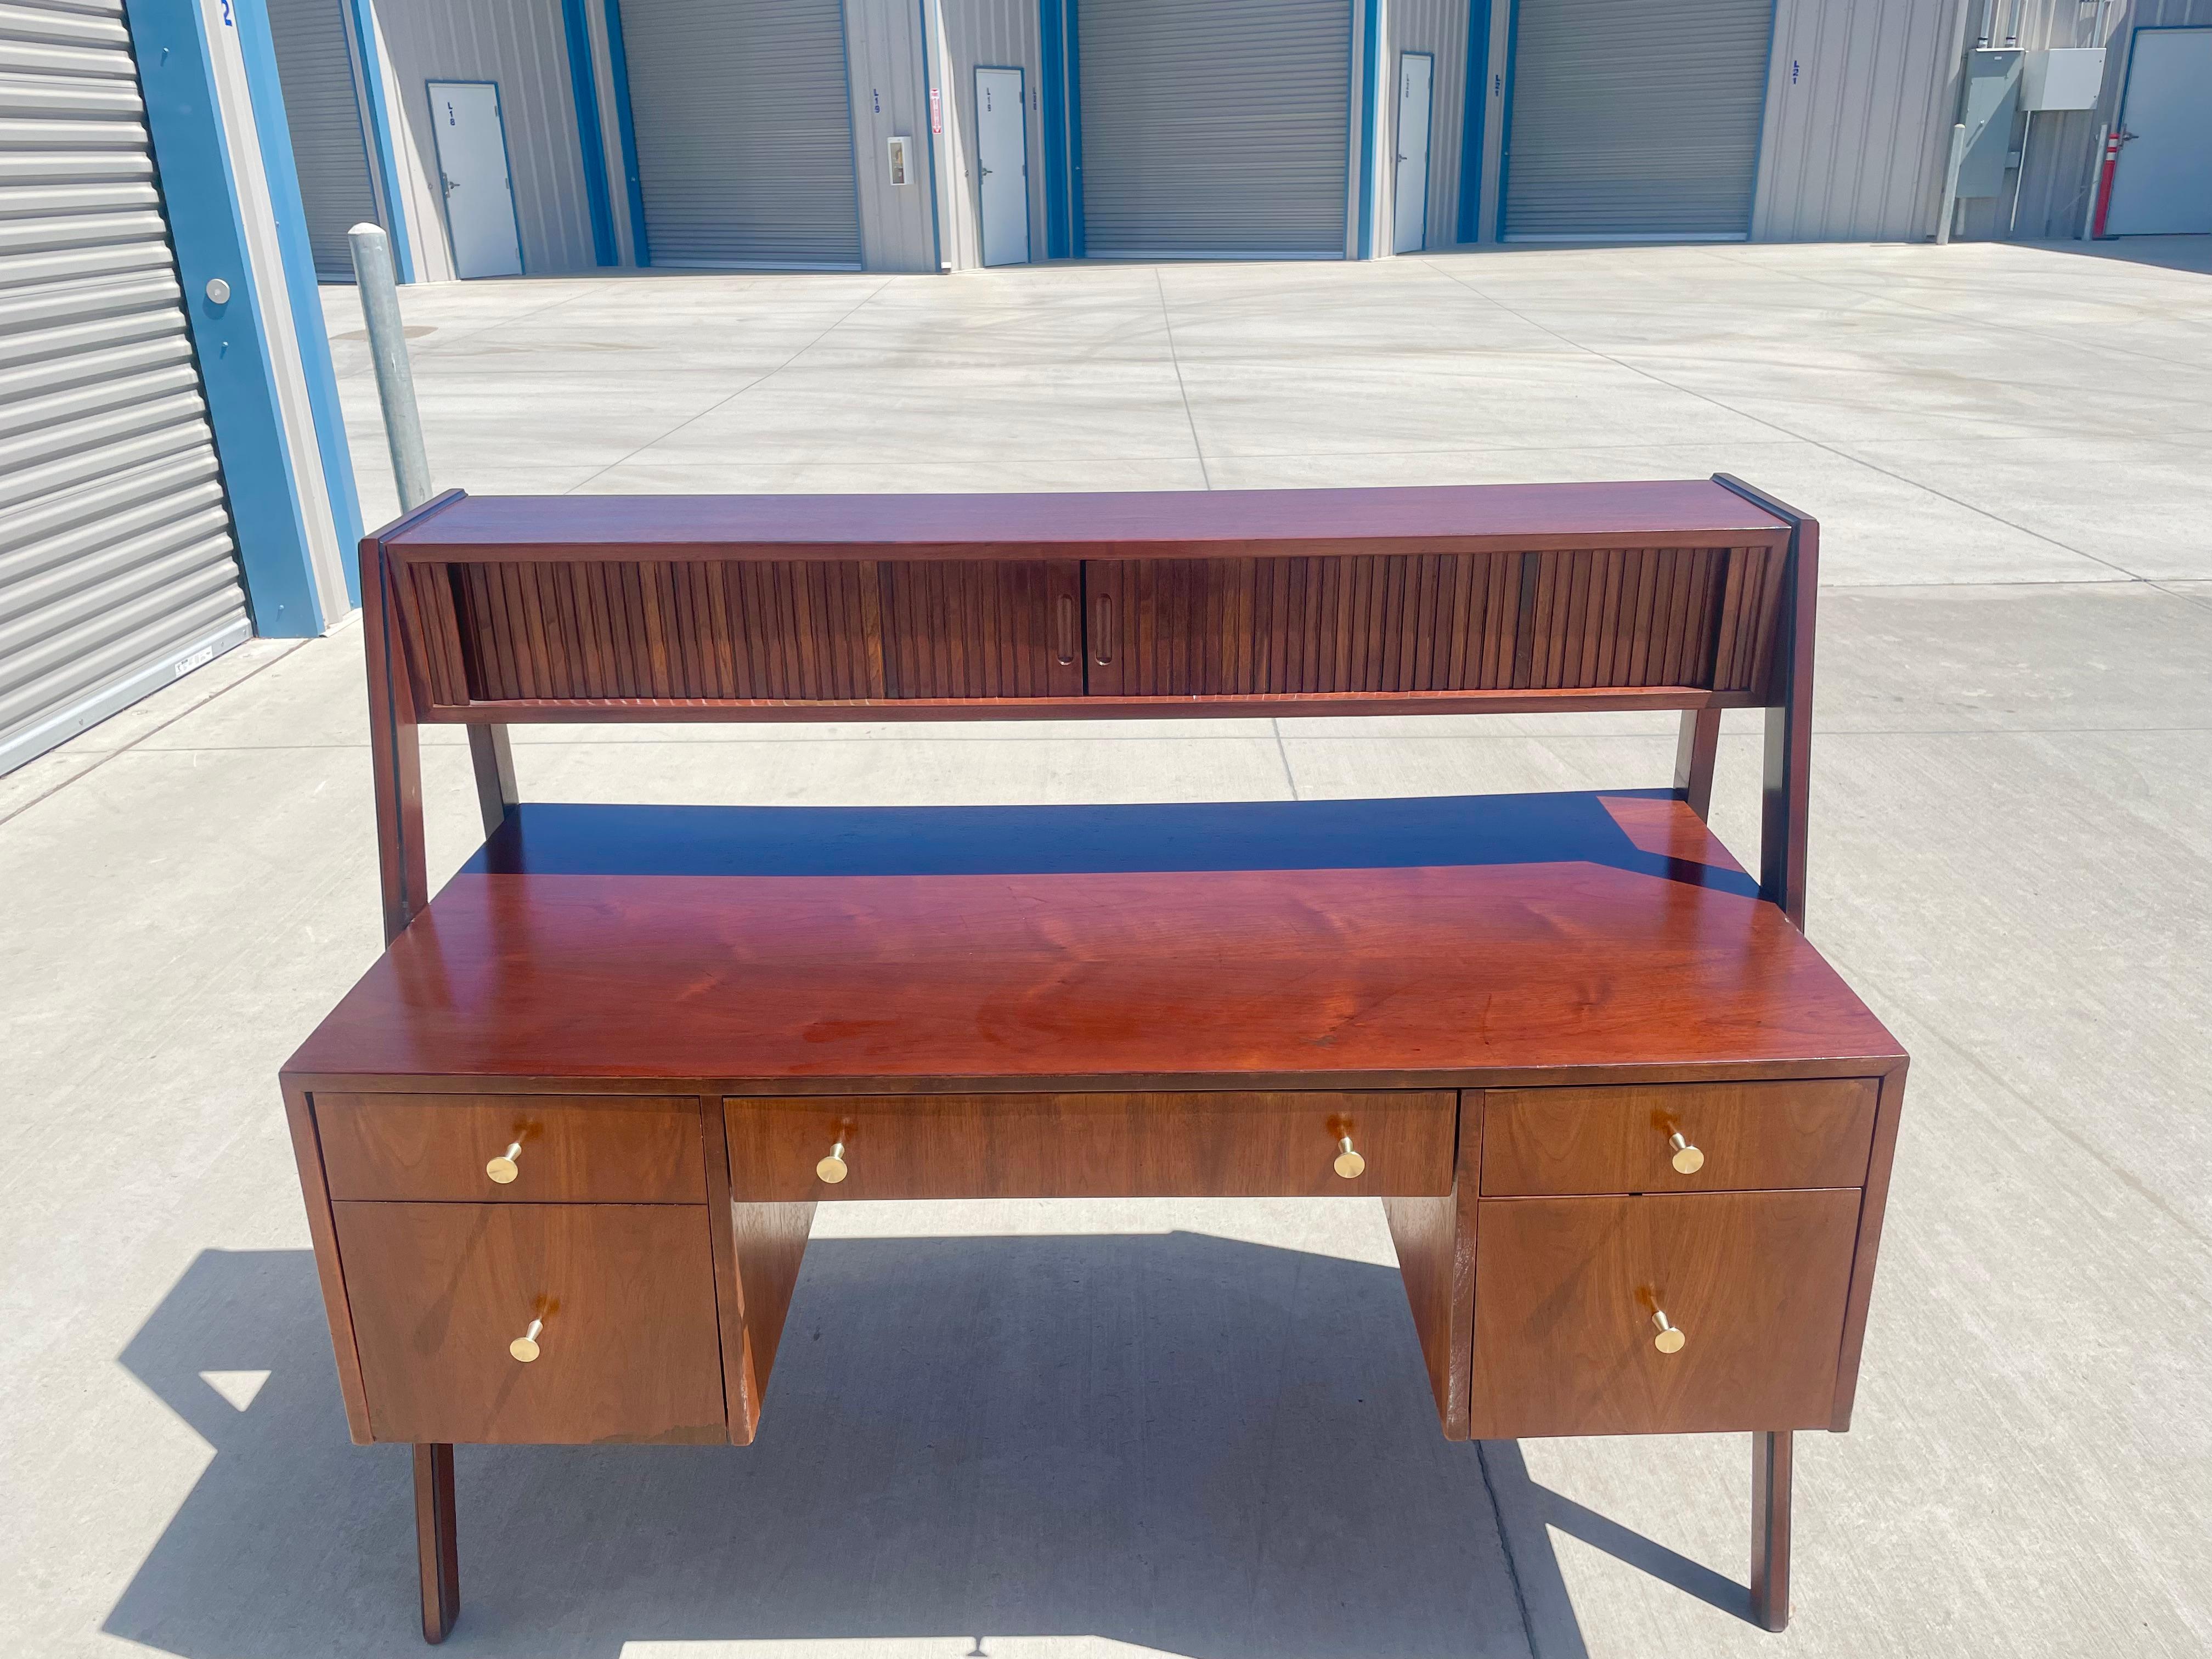 midcentury walnut floating tambour desk manufactured in the United States, circa 1960s. This vintage desk features a beautiful walnut grain and floating leg connected to the top, giving it the illusion that the tambour door is floating right in